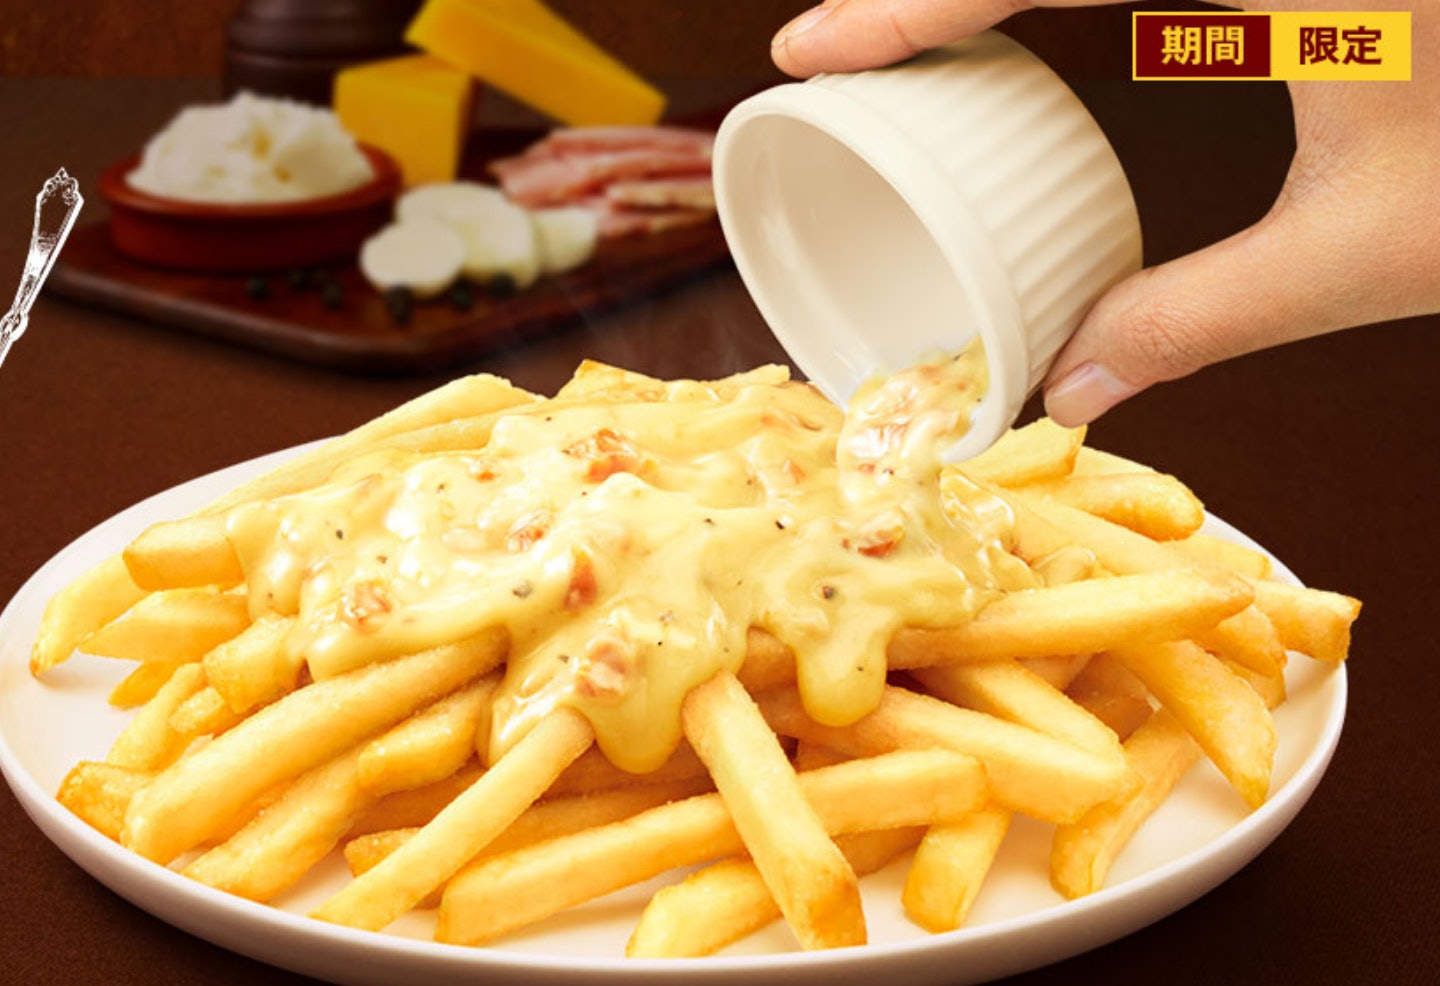 how to make a cheese sauce for french fries